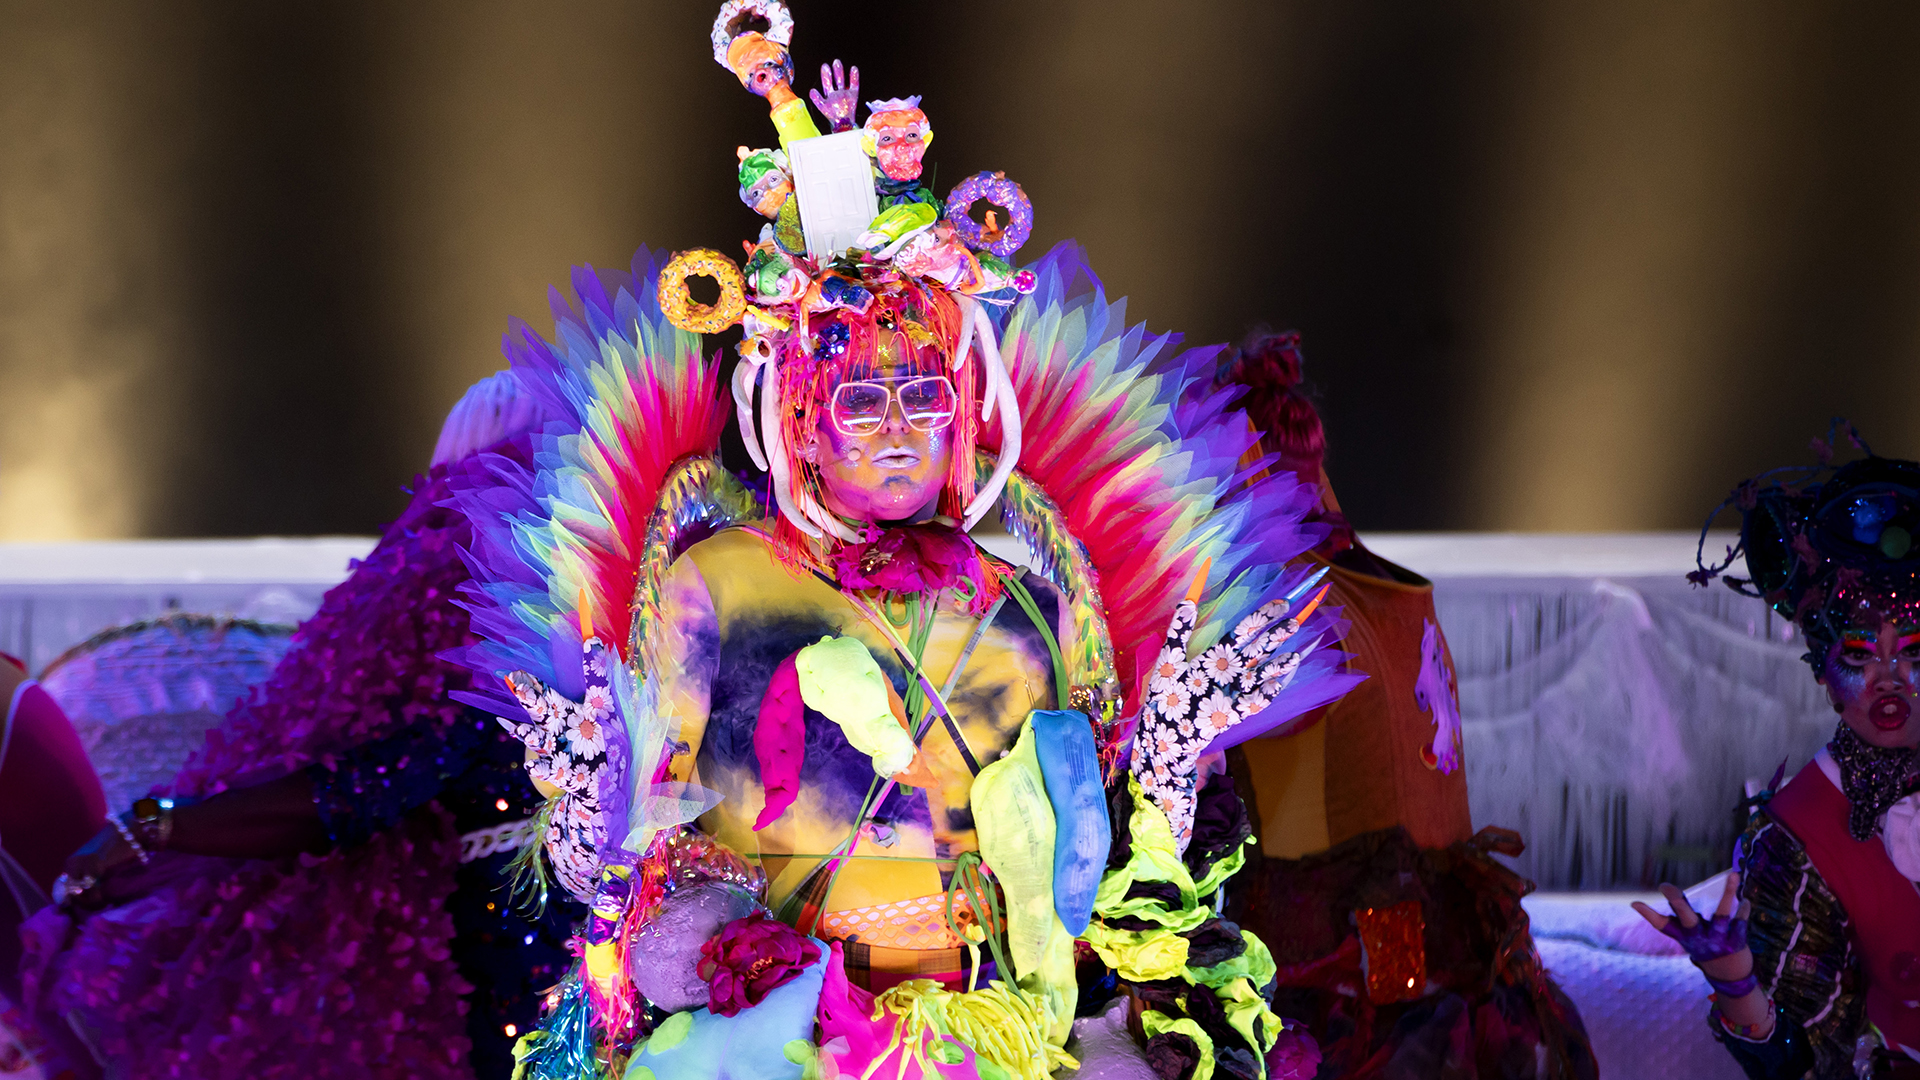 Machine Dazzle performs a musical solo on stage wearing bright neon rainbow feathers that go behind him and form a kind of halo around his shoulders and face. He is also wearing a neon outfit with long daisy-print gloves and headwear with little bejeweled ceramic heads, hands and donuts sticking out of it.